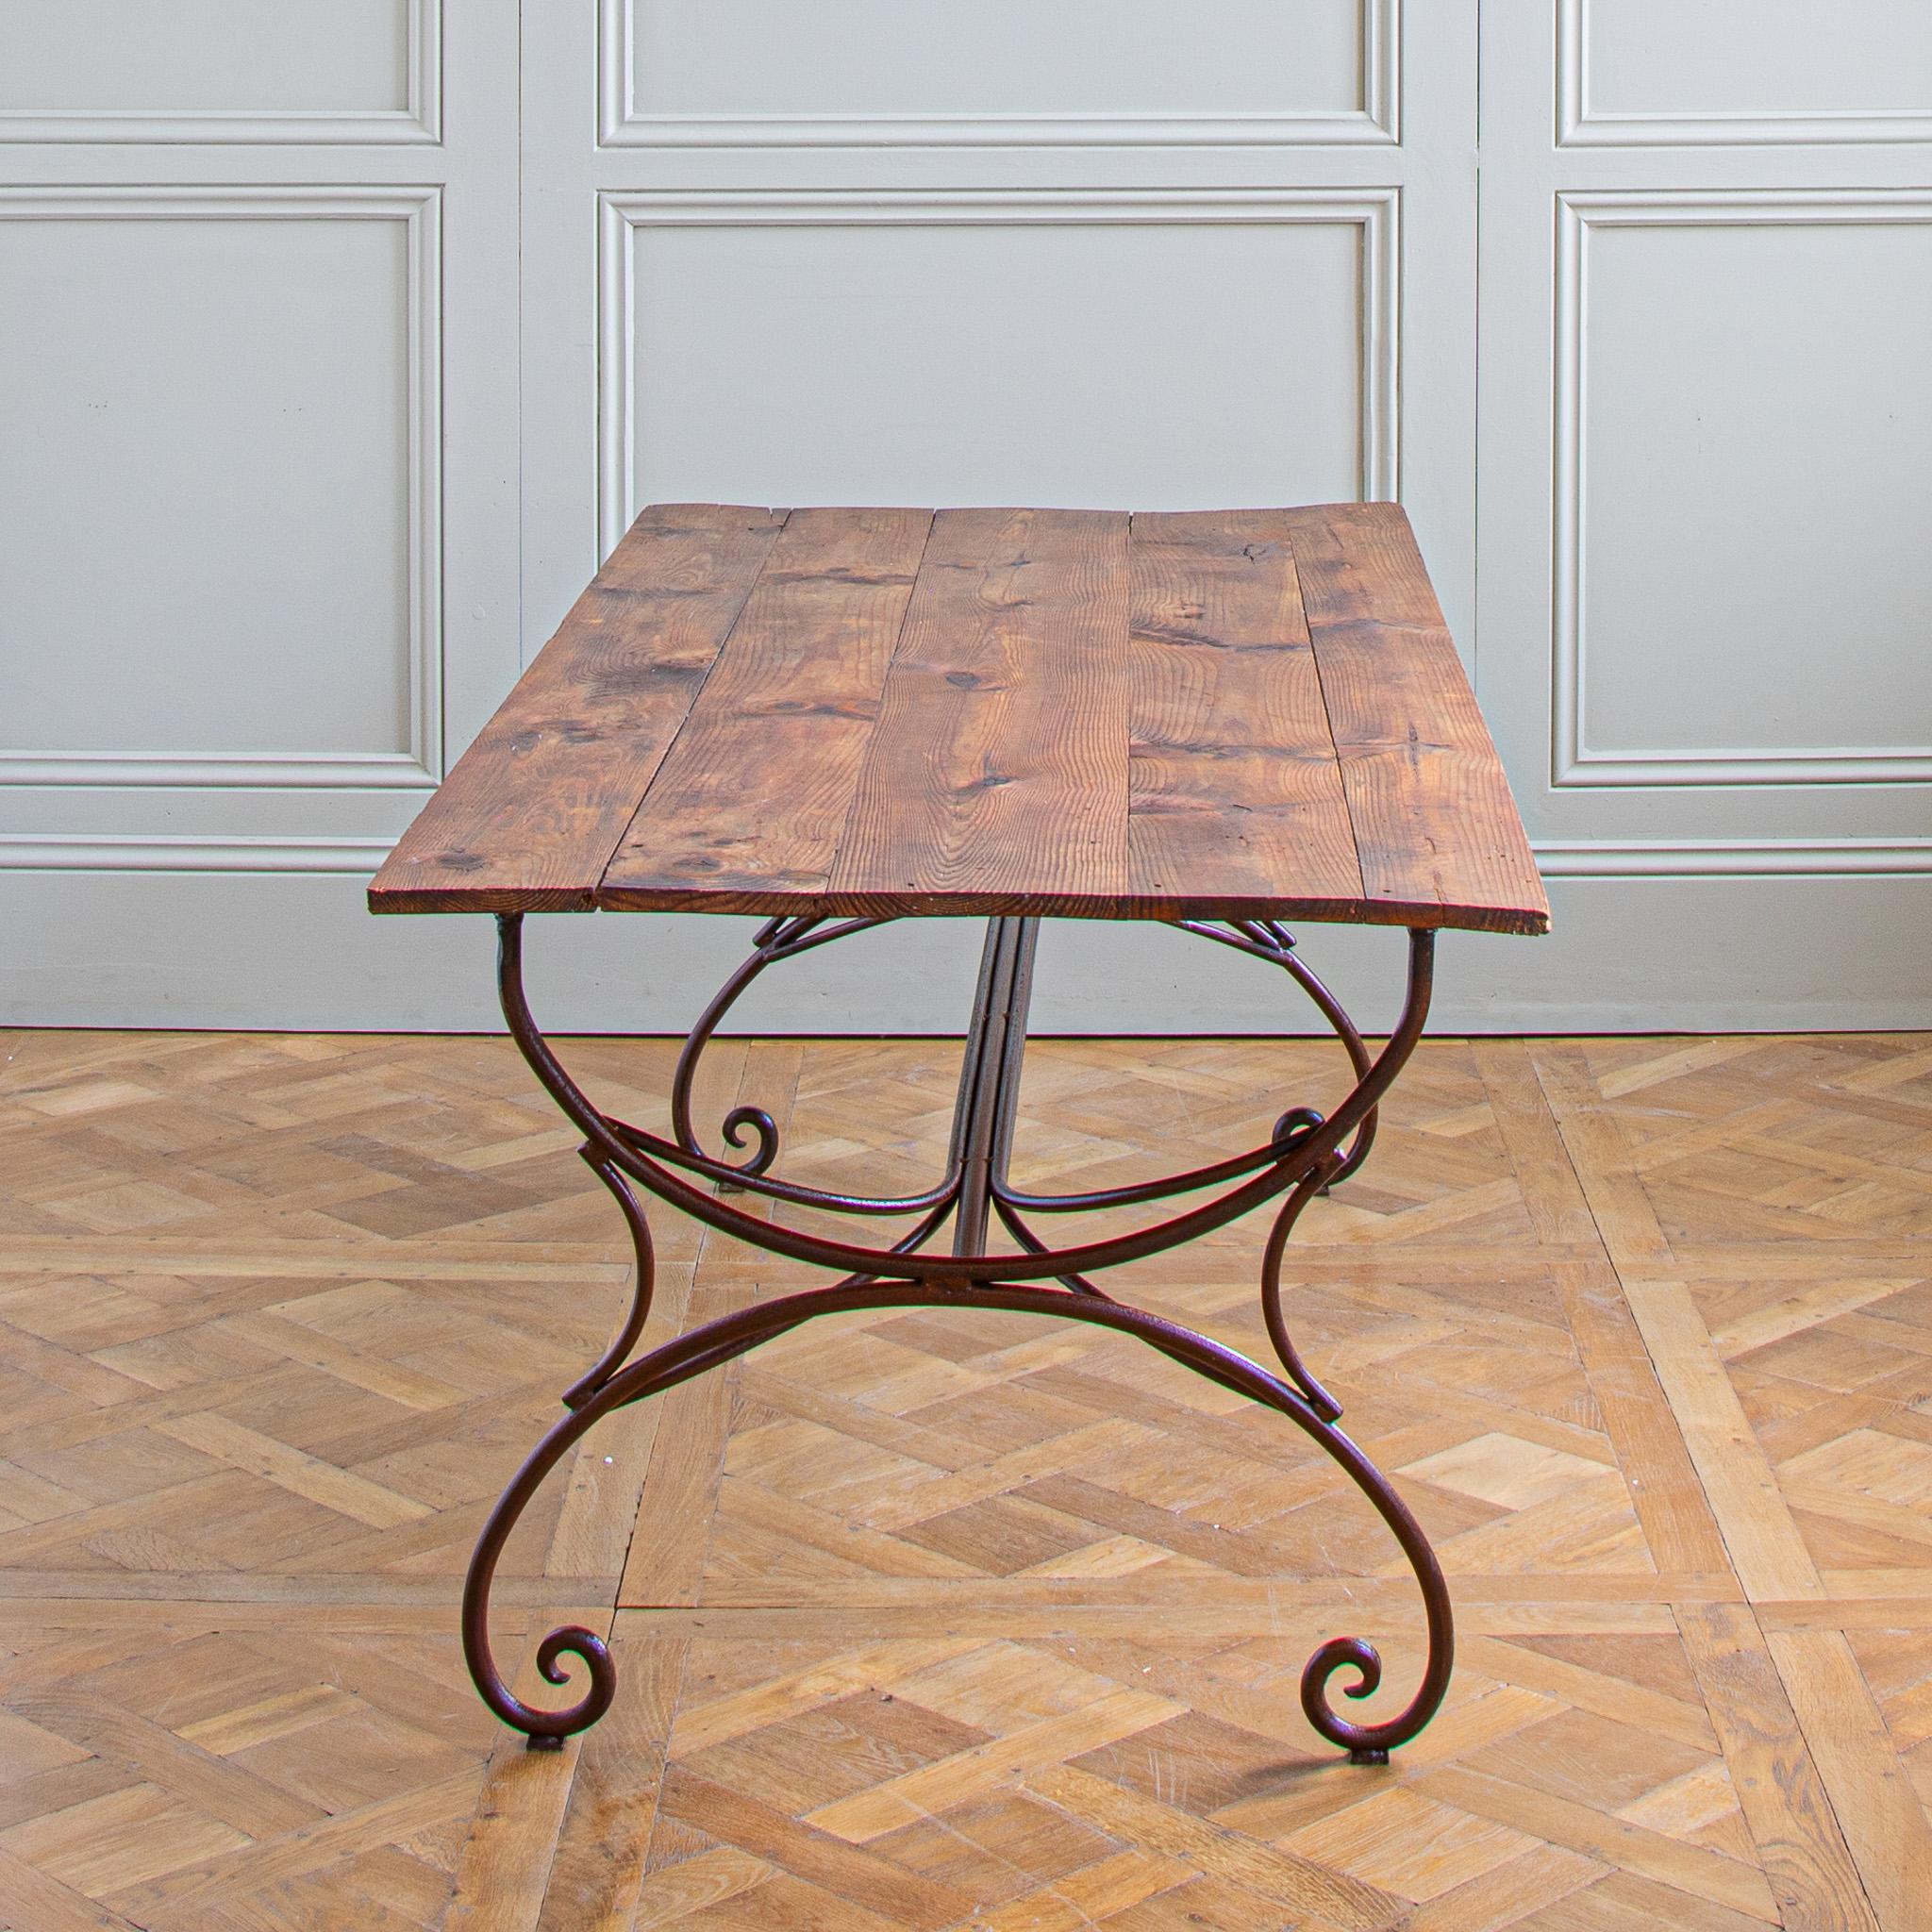 20th Century Large French Rustic Wrought Iron Dining Or Garden Table For Sale